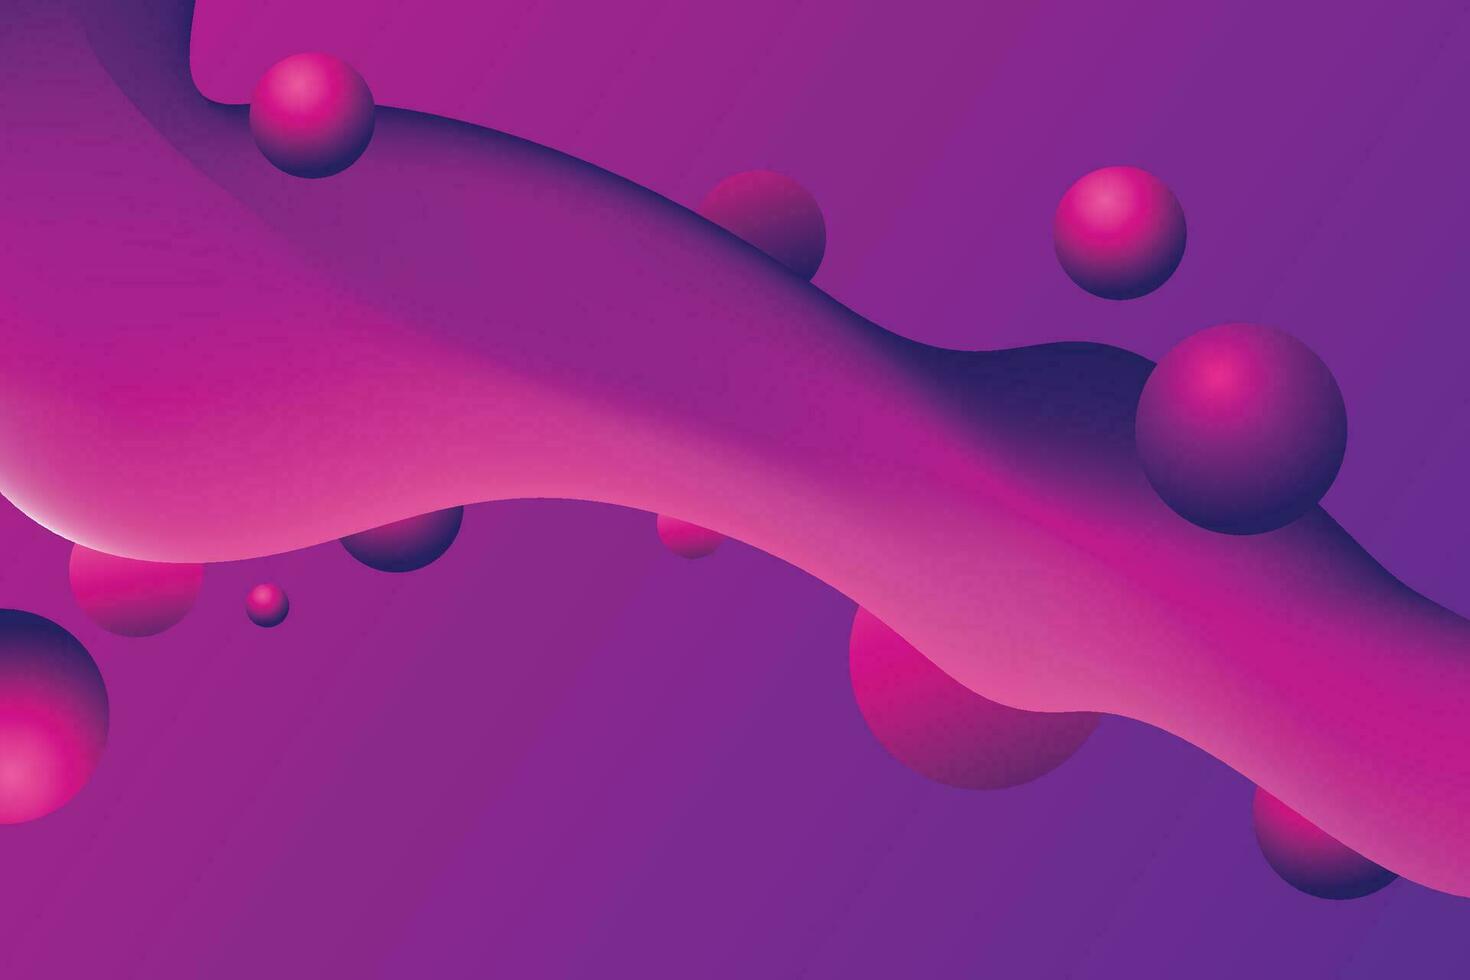 Liquid wave background with pink color background. Fluid wavy shapes. Eps10 vector